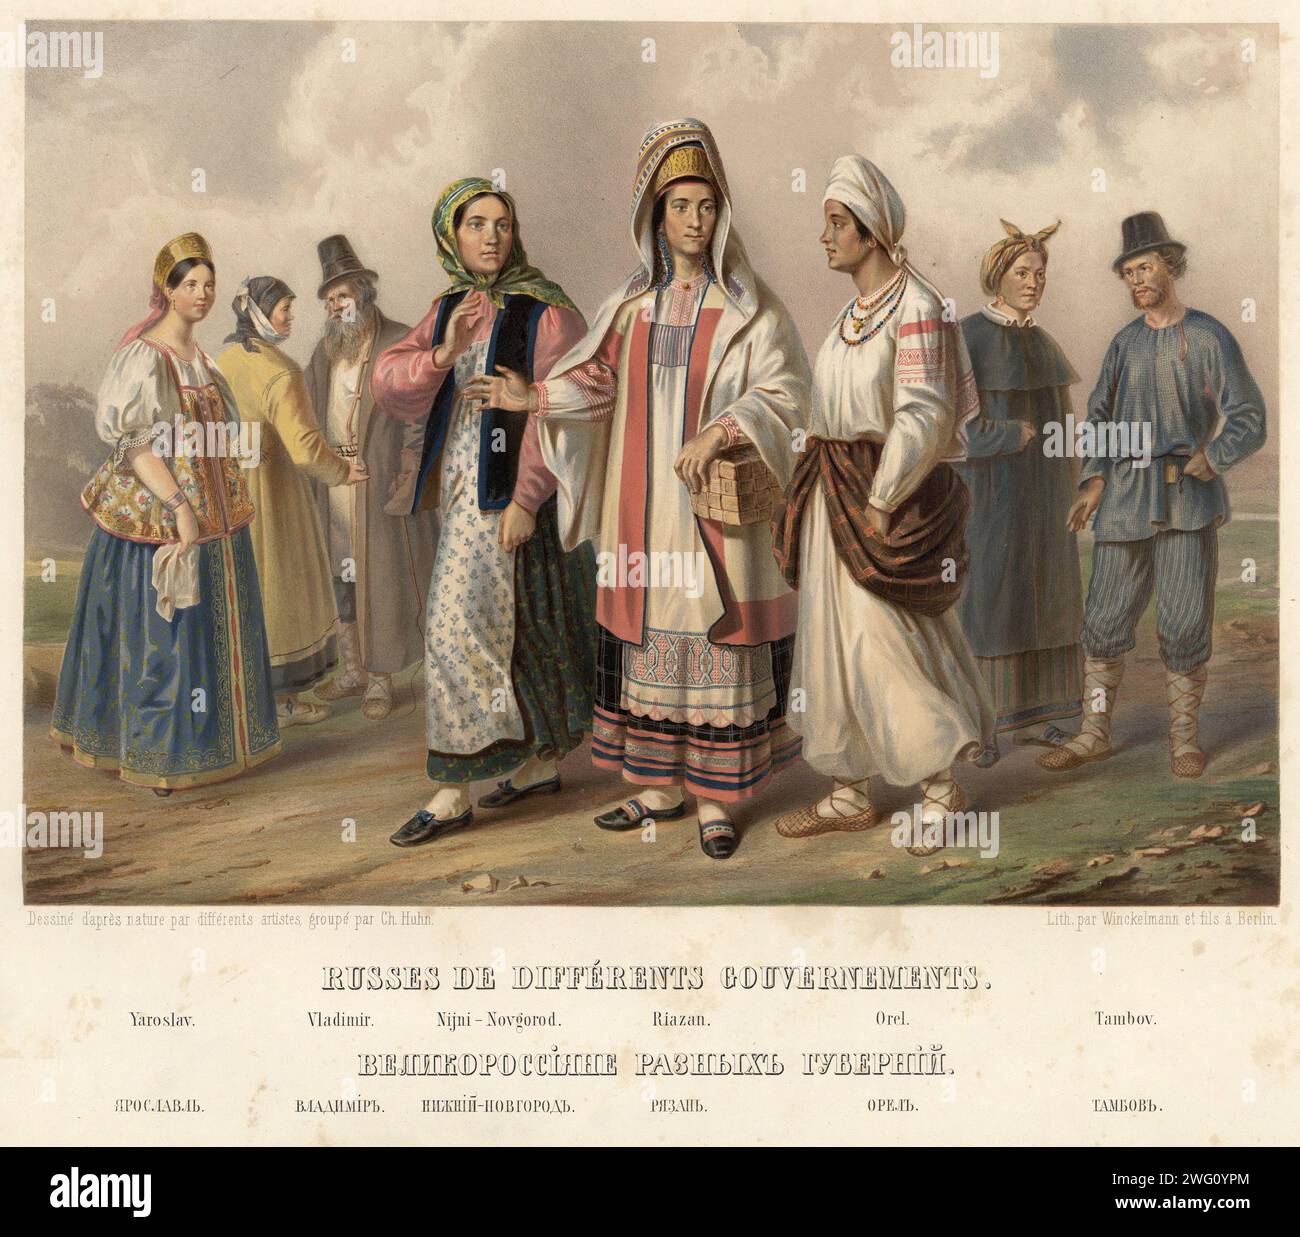 Great Russians from different provinces. Yaroslavl. Vladimir. Nizhny Novgorod. Ryazan. Oryol. Tambov. Sheet 2 from the album &quot;Description ethnographique des peuples de la Russie&quot;, volume 1. Description ethnographique des peuples de la Russie (Ethnographic description of the peoples of Russia) is a two-volume work published in Saint Petersburg in 1862 to mark the millennium of the founding of the Russian Empire (traditionally traced to the founding of the state of Kievan Rus' in 862). The work is dedicated to Tsar Alexander II. Volume 1 consists of 62 colored illustrations depicting e Stock Photo